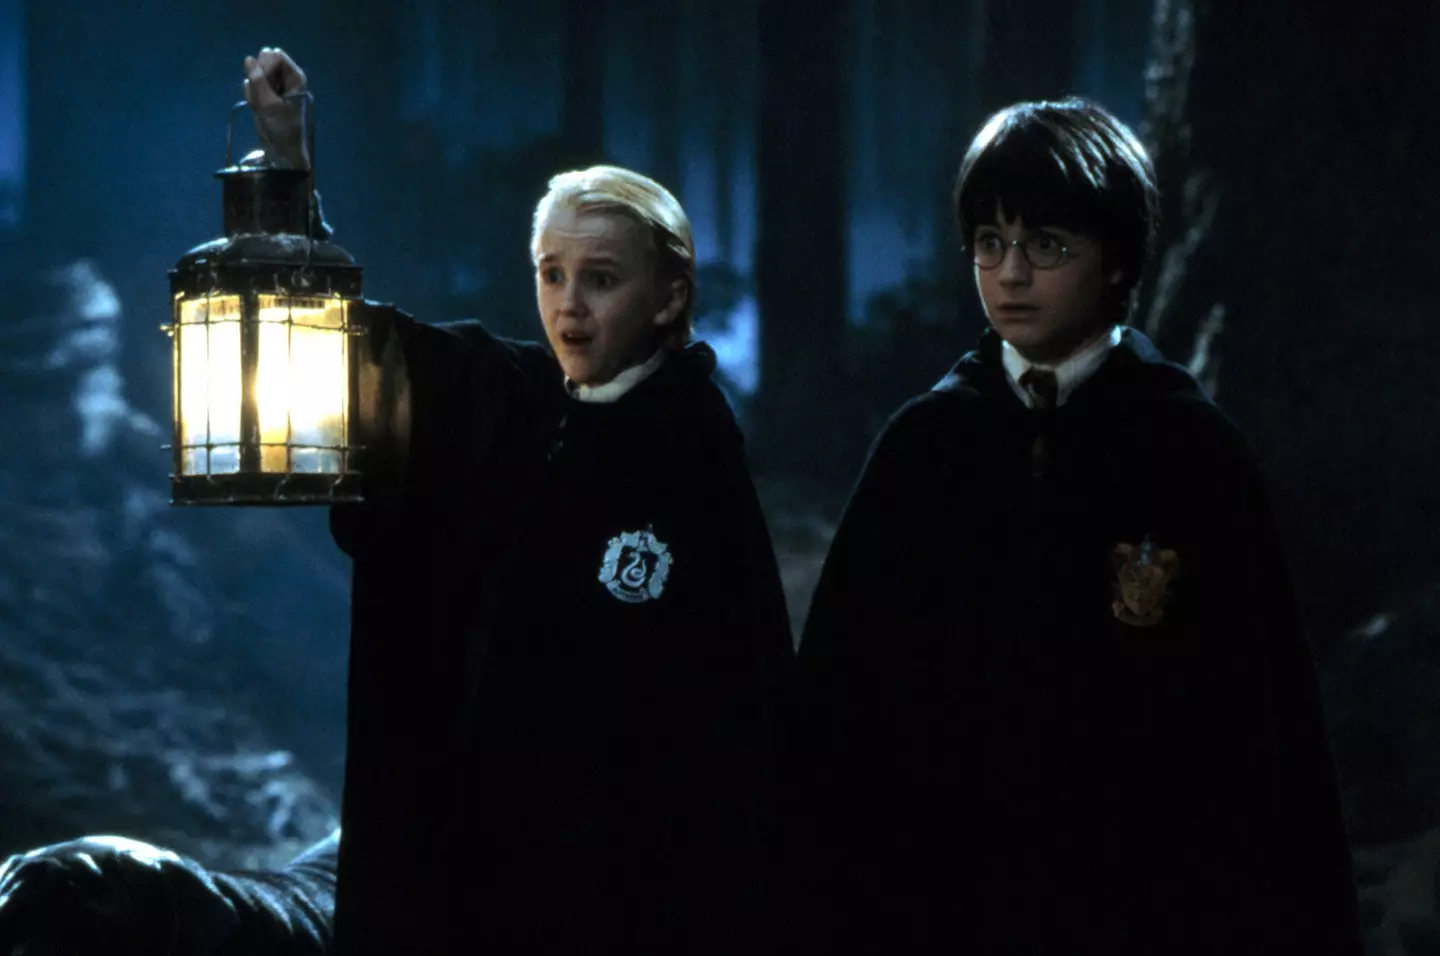 Tom Felton and Daniel Radcliffe in the first Harry Potter movie.